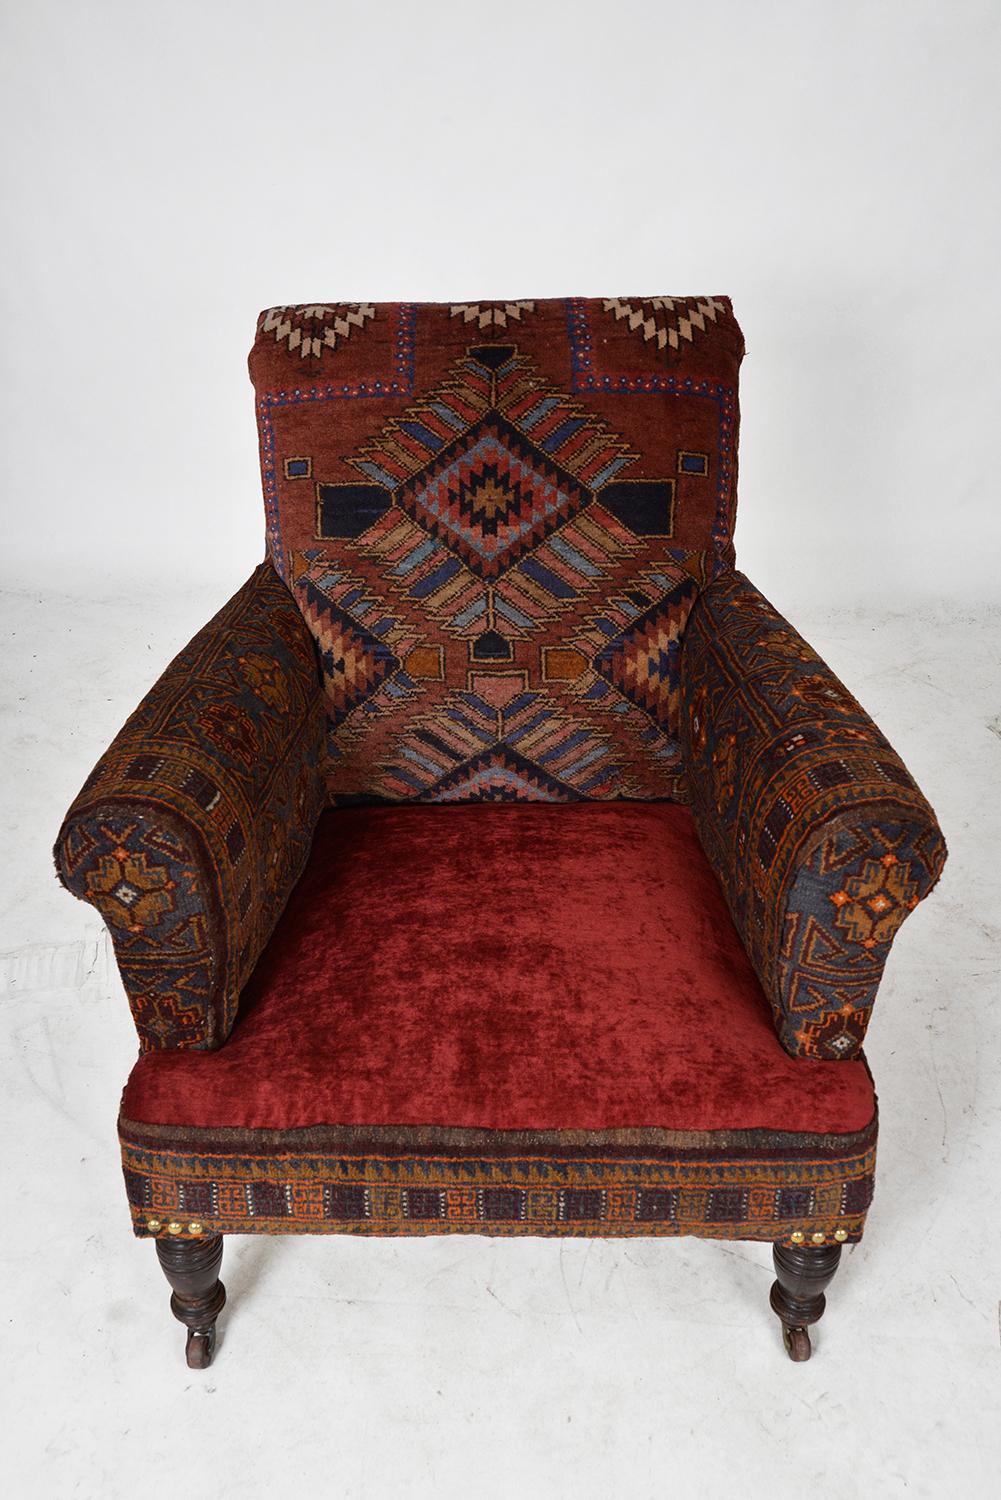  Antique Baluch Rug Carpet Chair Library Armchair Victorian Bohemian Upholstered 1